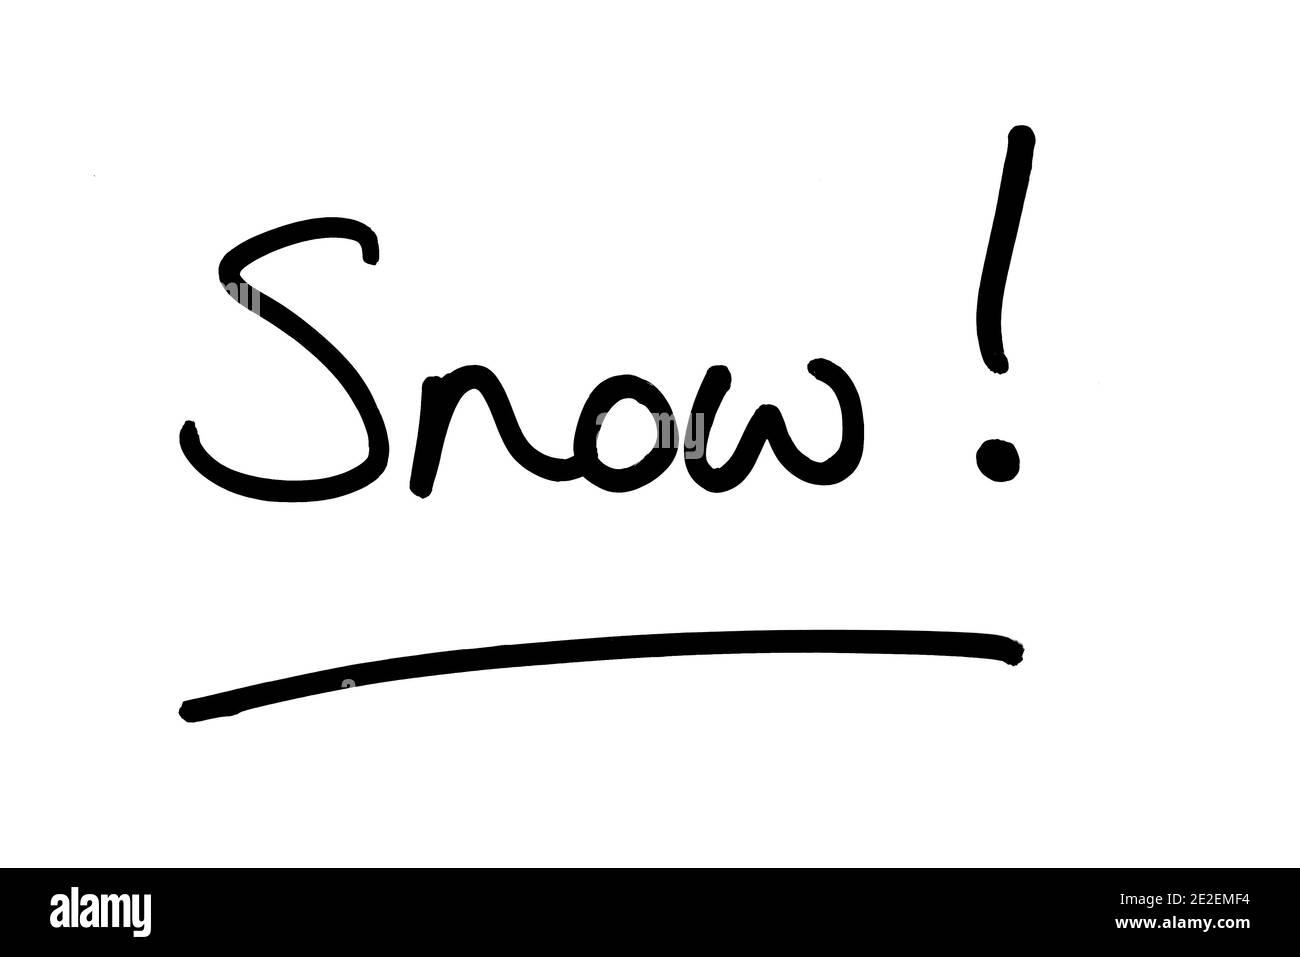 The word Snow! handwritten on a white background. Stock Photo